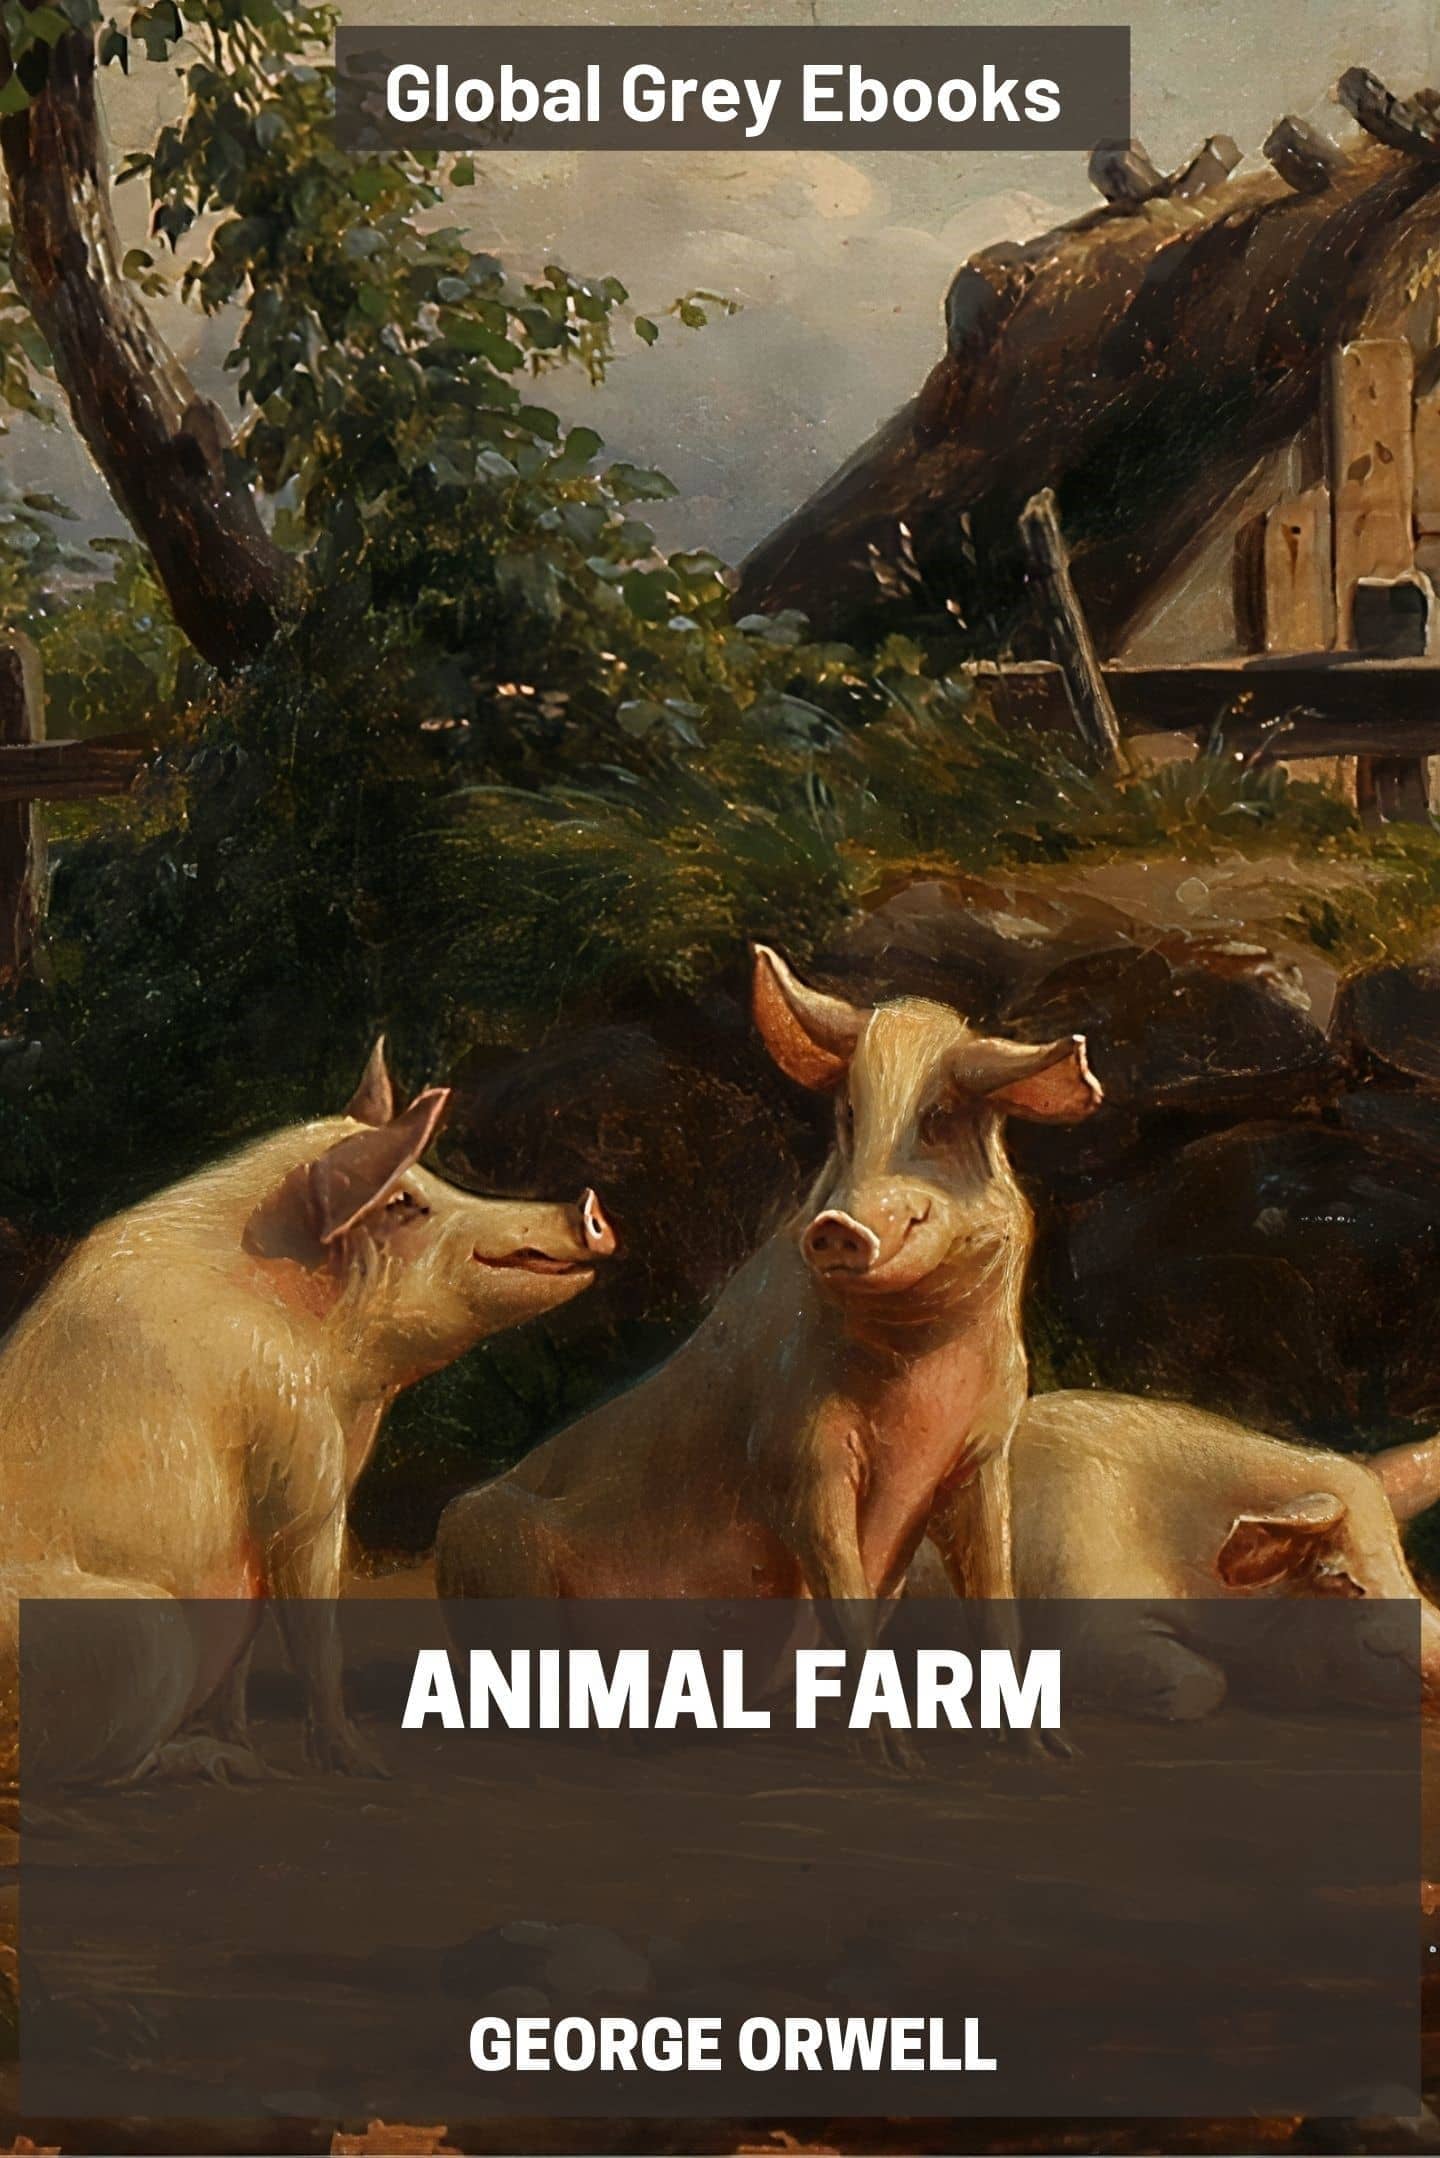 Animal Farm by George Orwell - Complete text online - Global Grey ebooks